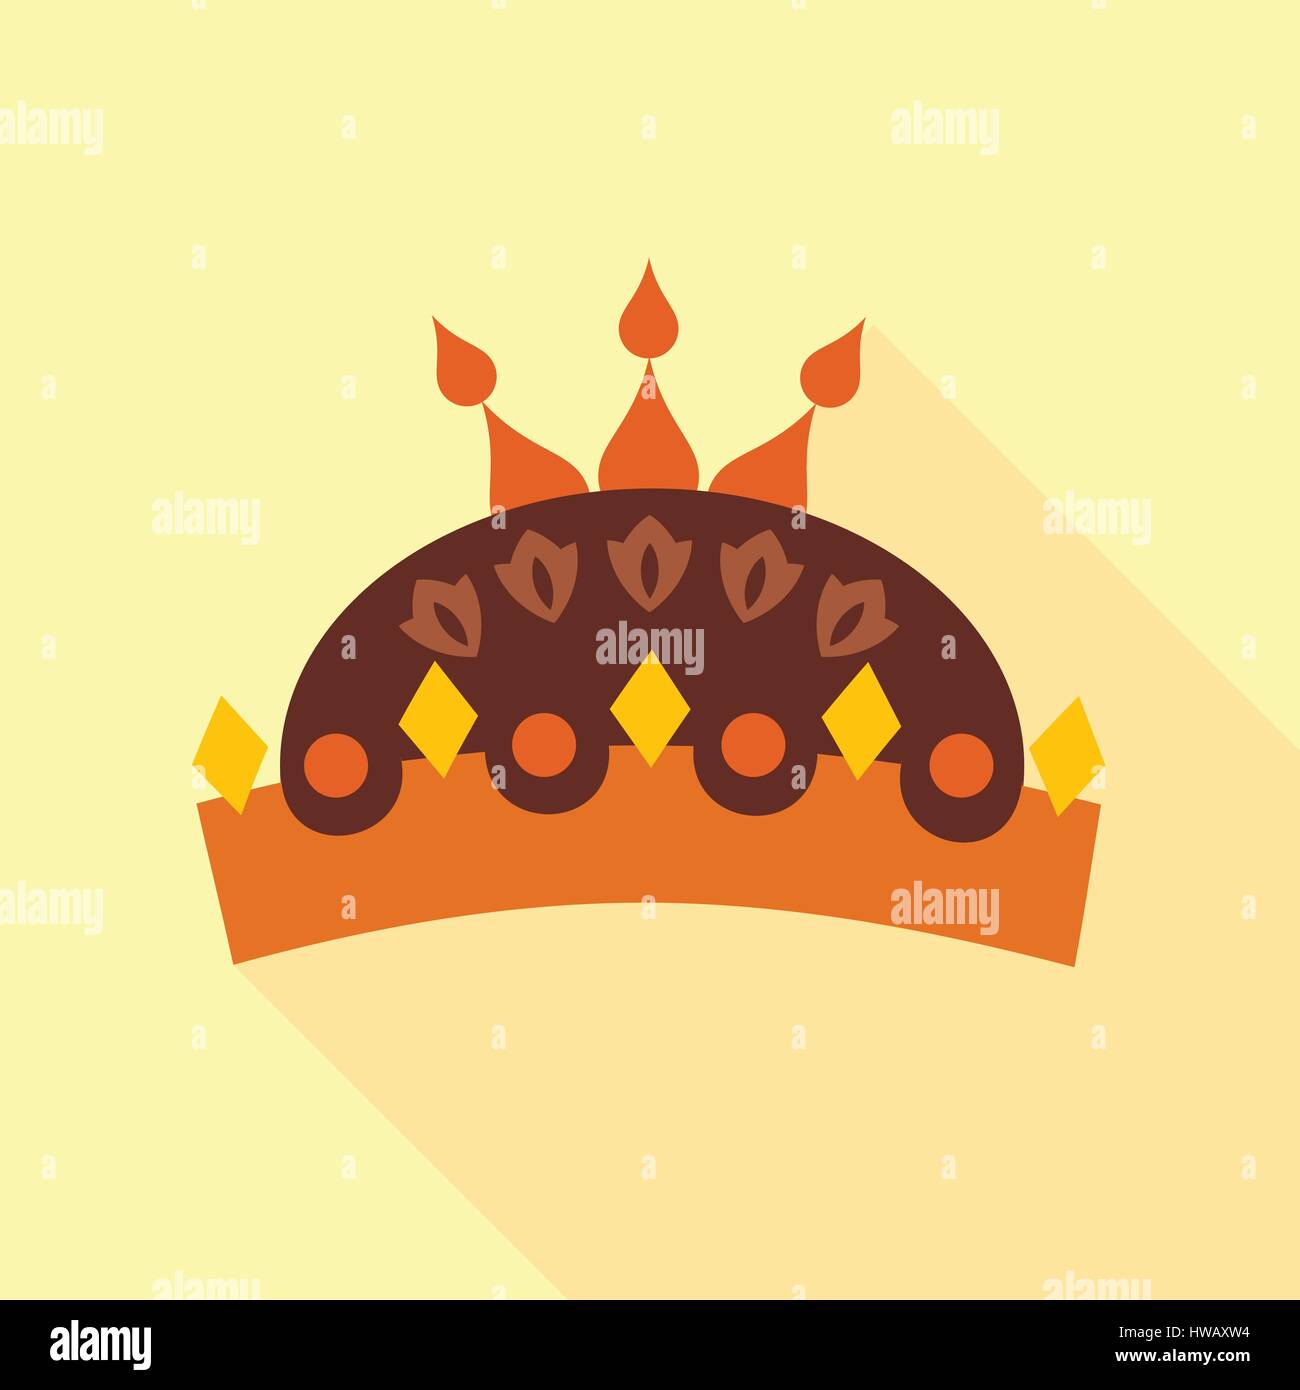 Coronation crown jewels Stock Vector Images - Alamy